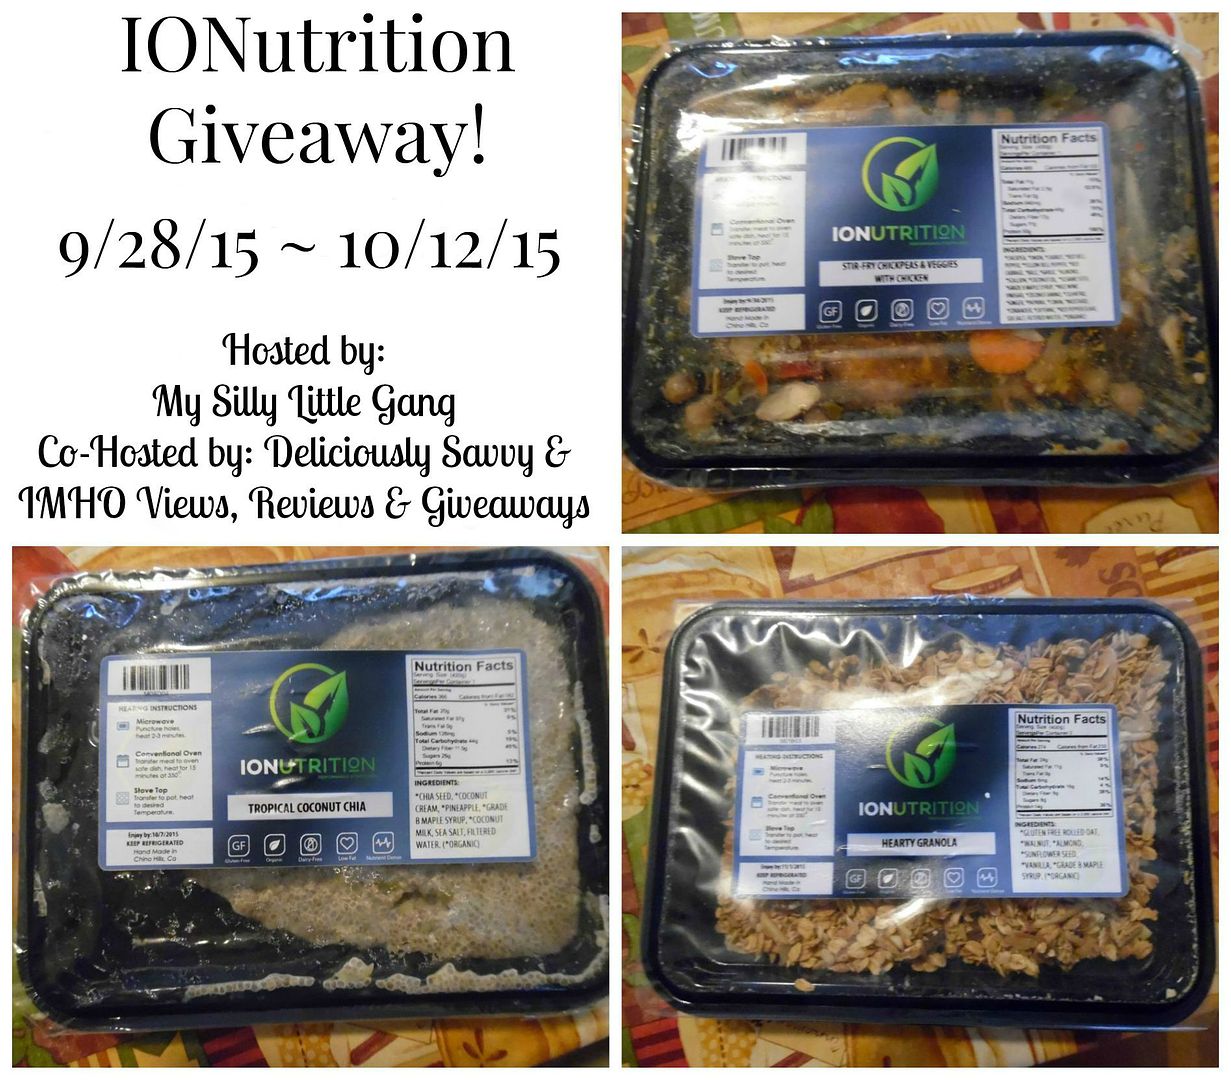 ionutrition-giveaway